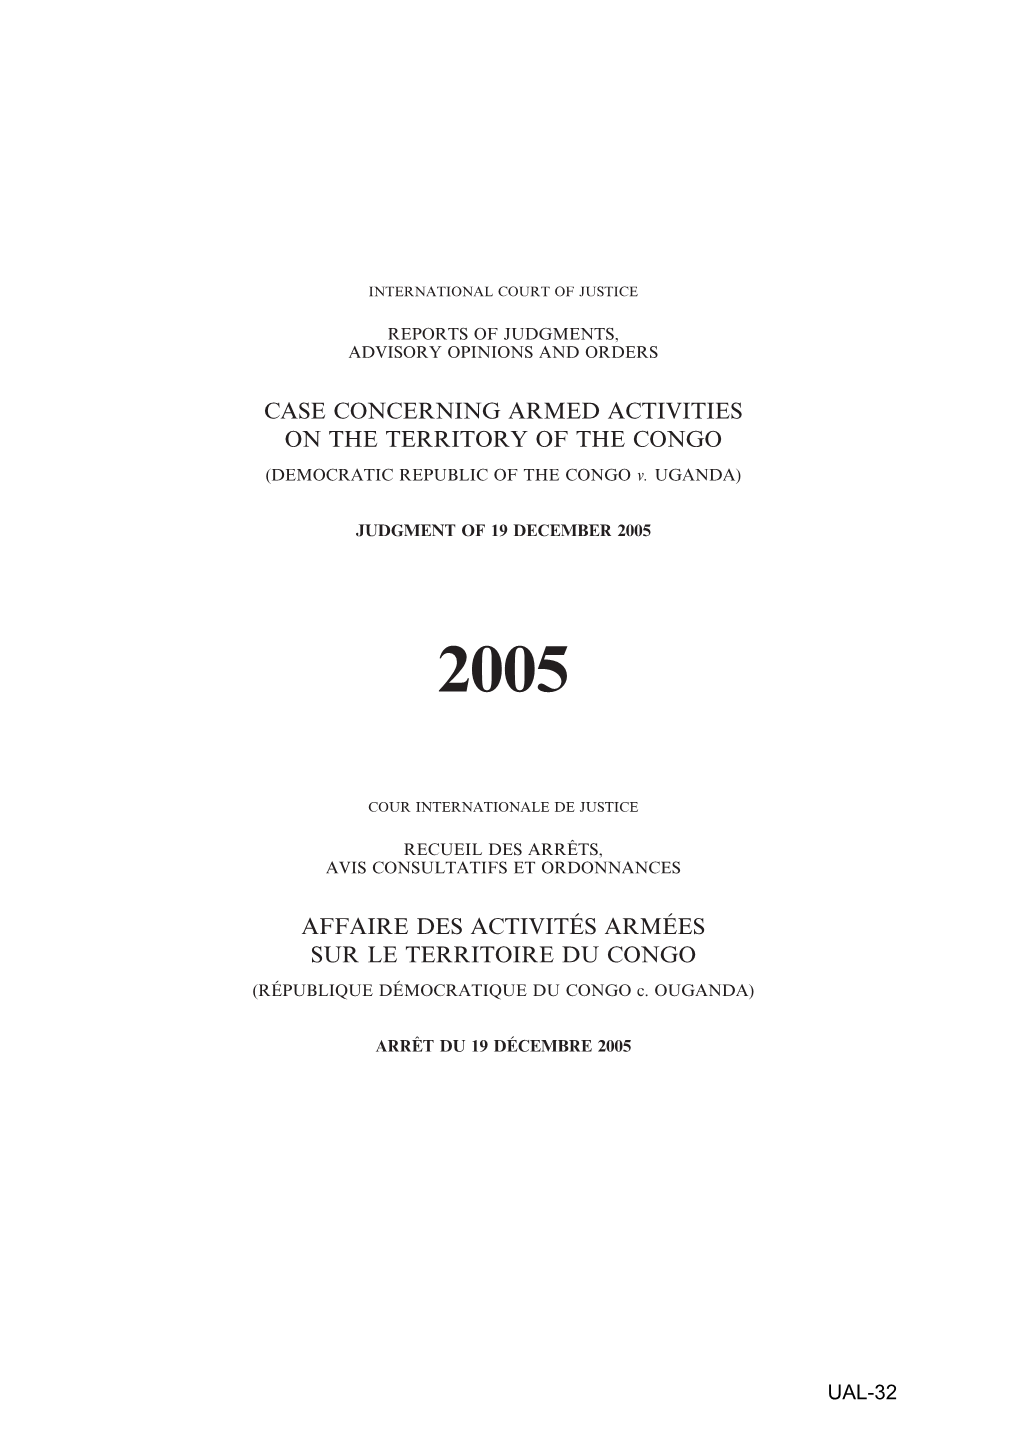 CASE CONCERNING ARMED ACTIVITIES on the TERRITORY of the CONGO (DEMOCRATIC REPUBLIC of the CONGO V